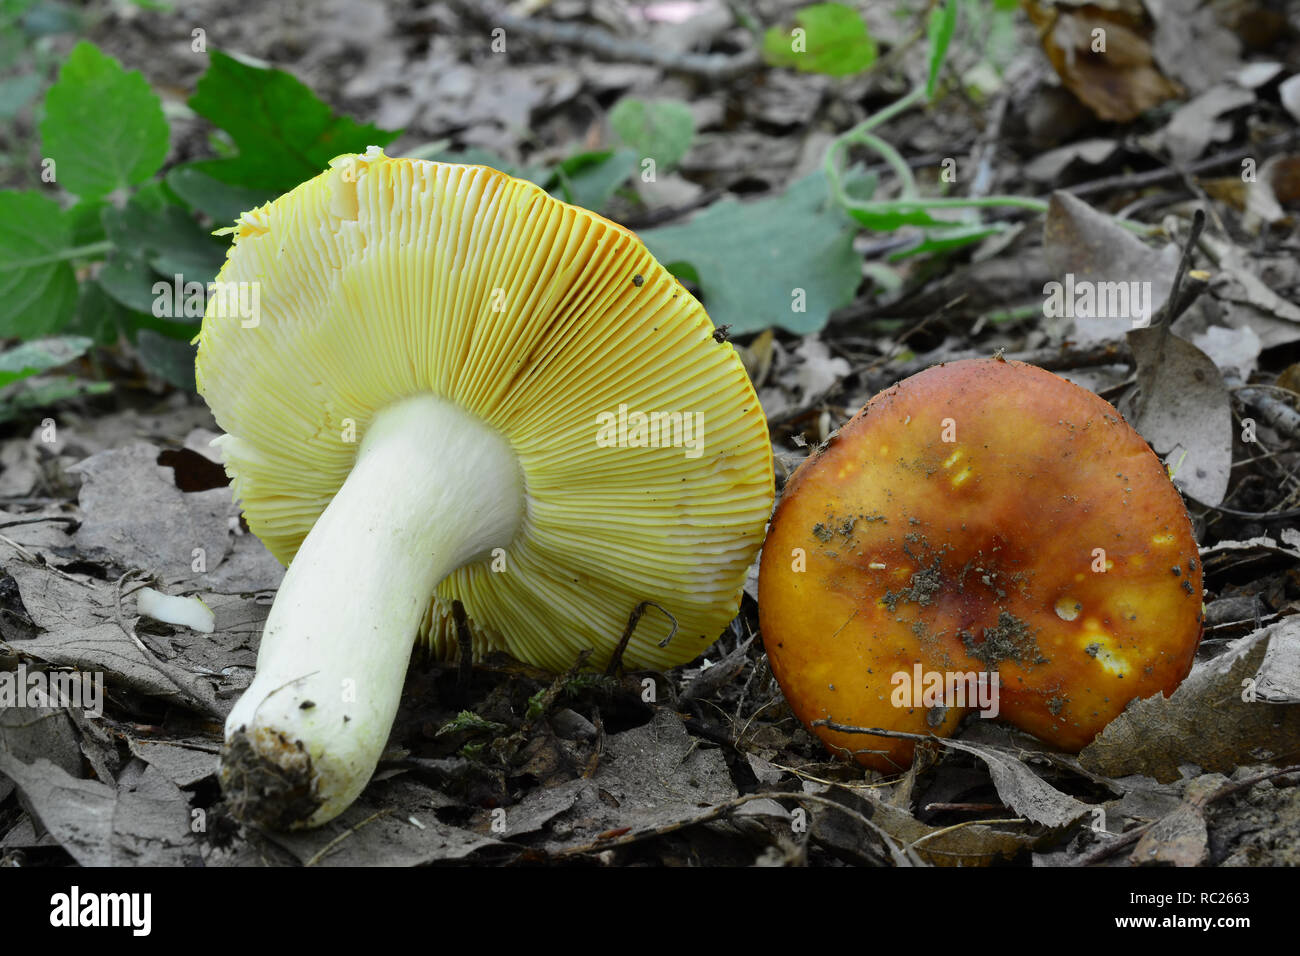 Two nice specimen of delicious wild  Russula aurea or Gilded Brittlegill mushrooms in natural habitat, lowland oak forest, one with stem and gills, an Stock Photo